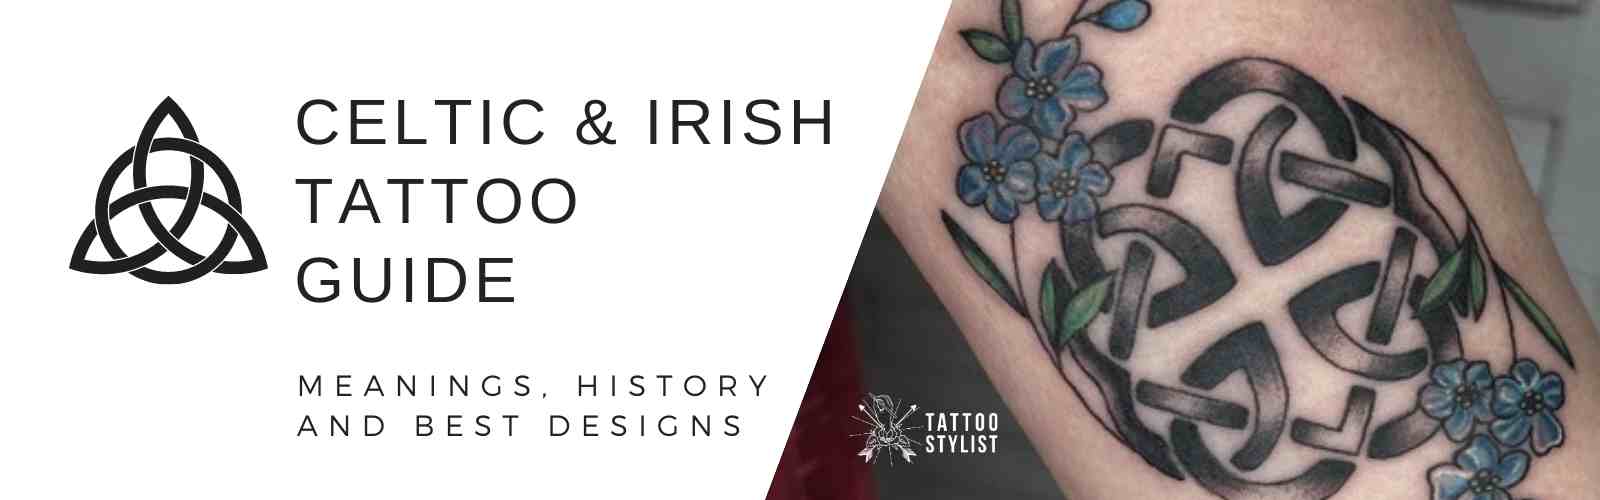 125 Celtic Tattoo Ideas to Bring Out the Warrior in You  Wild Tattoo Art